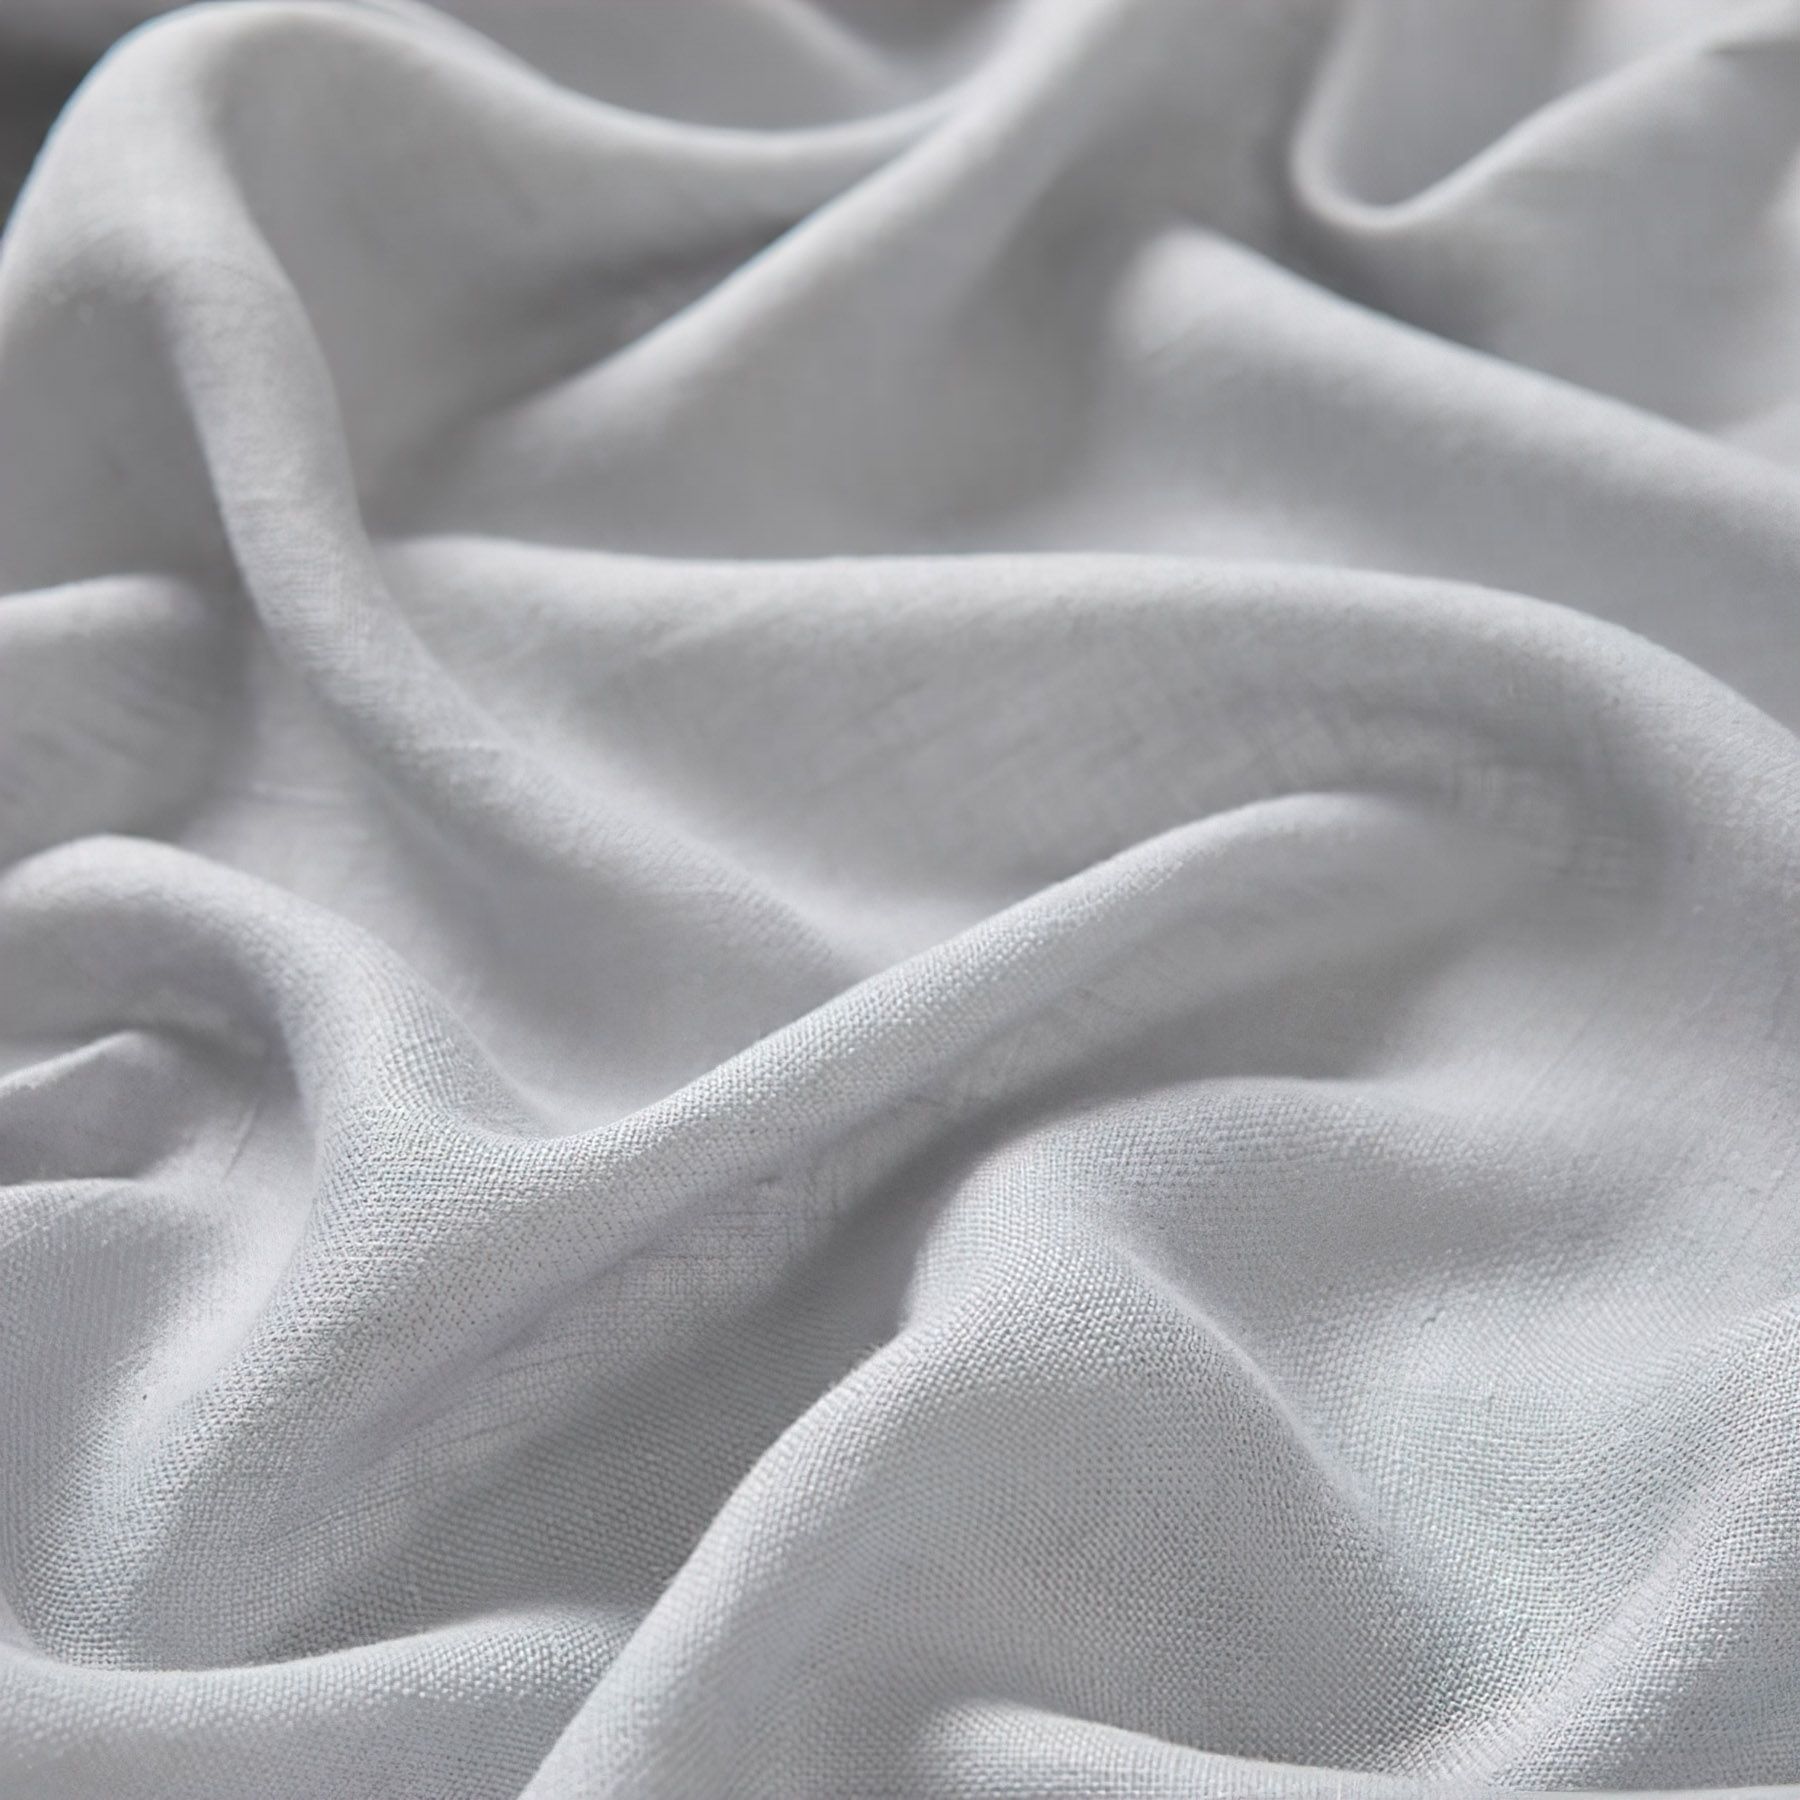 This beautiful 100% linen fabric from Warwick is light, luxurious, durable, and perfect for curtains.